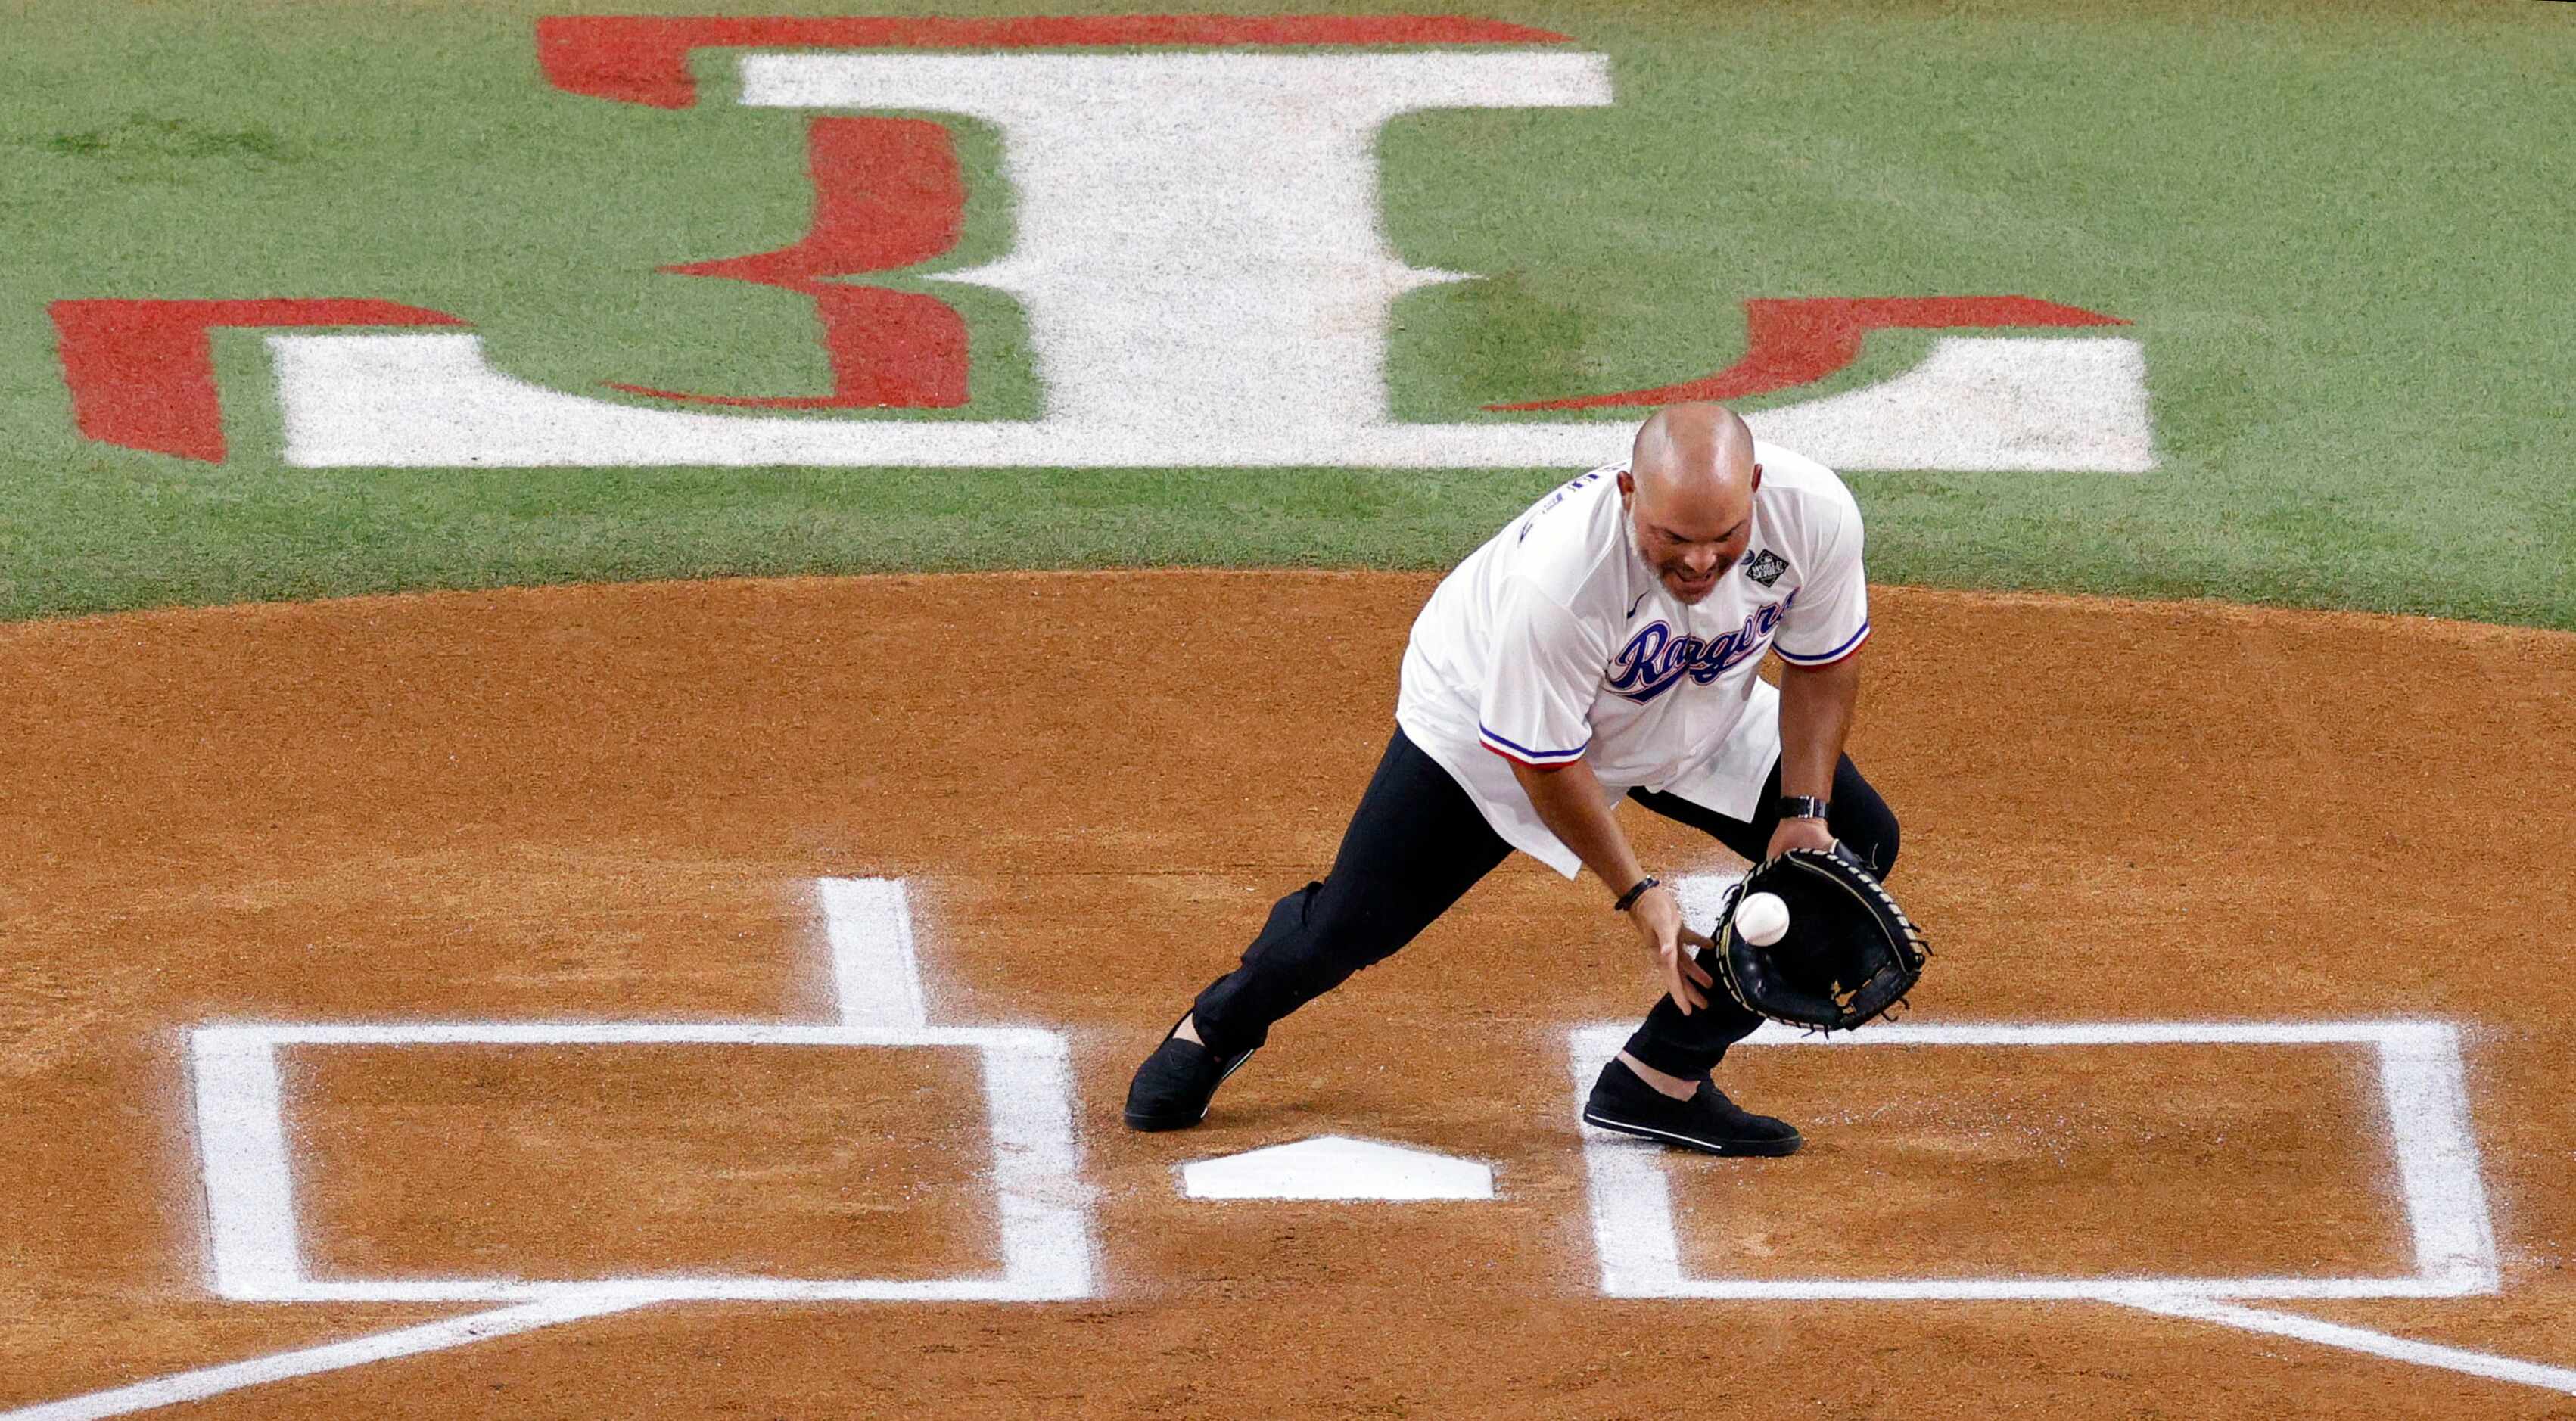 Rangers Legend and Baseball Hall of Famer Iván “Pudge” Rodríguez catches a ball during the...